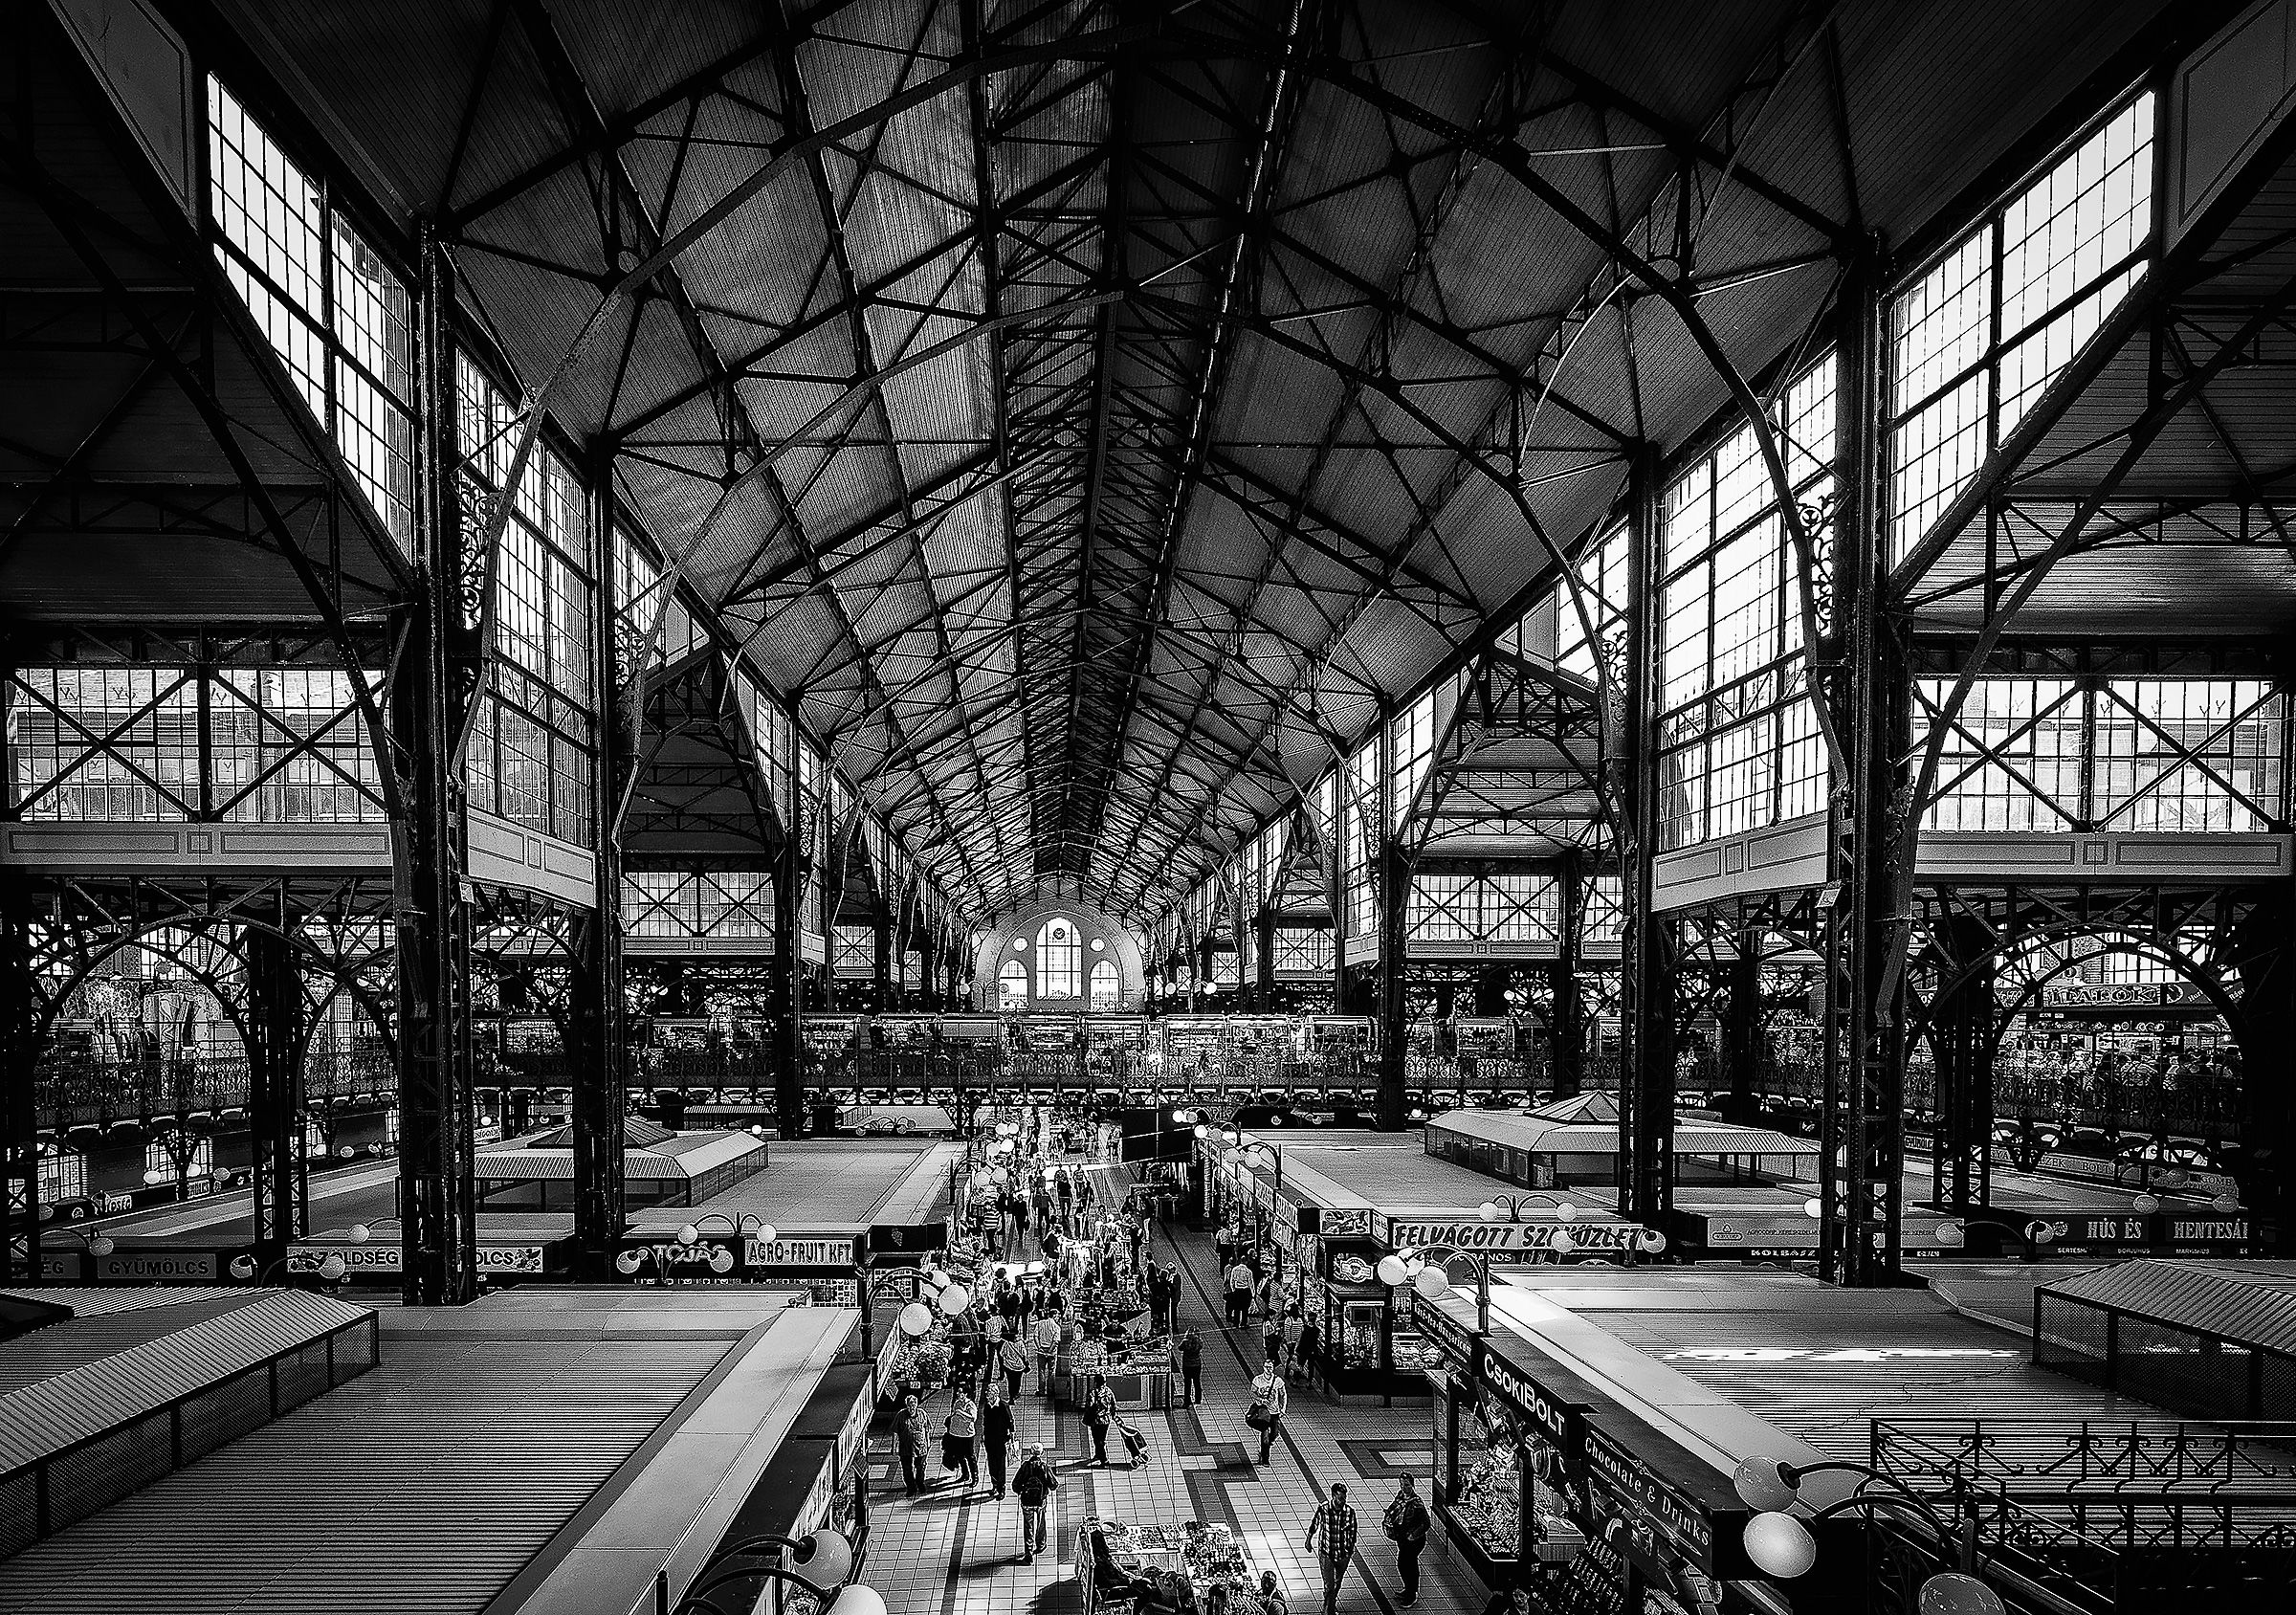 The central covered market in Budapest...